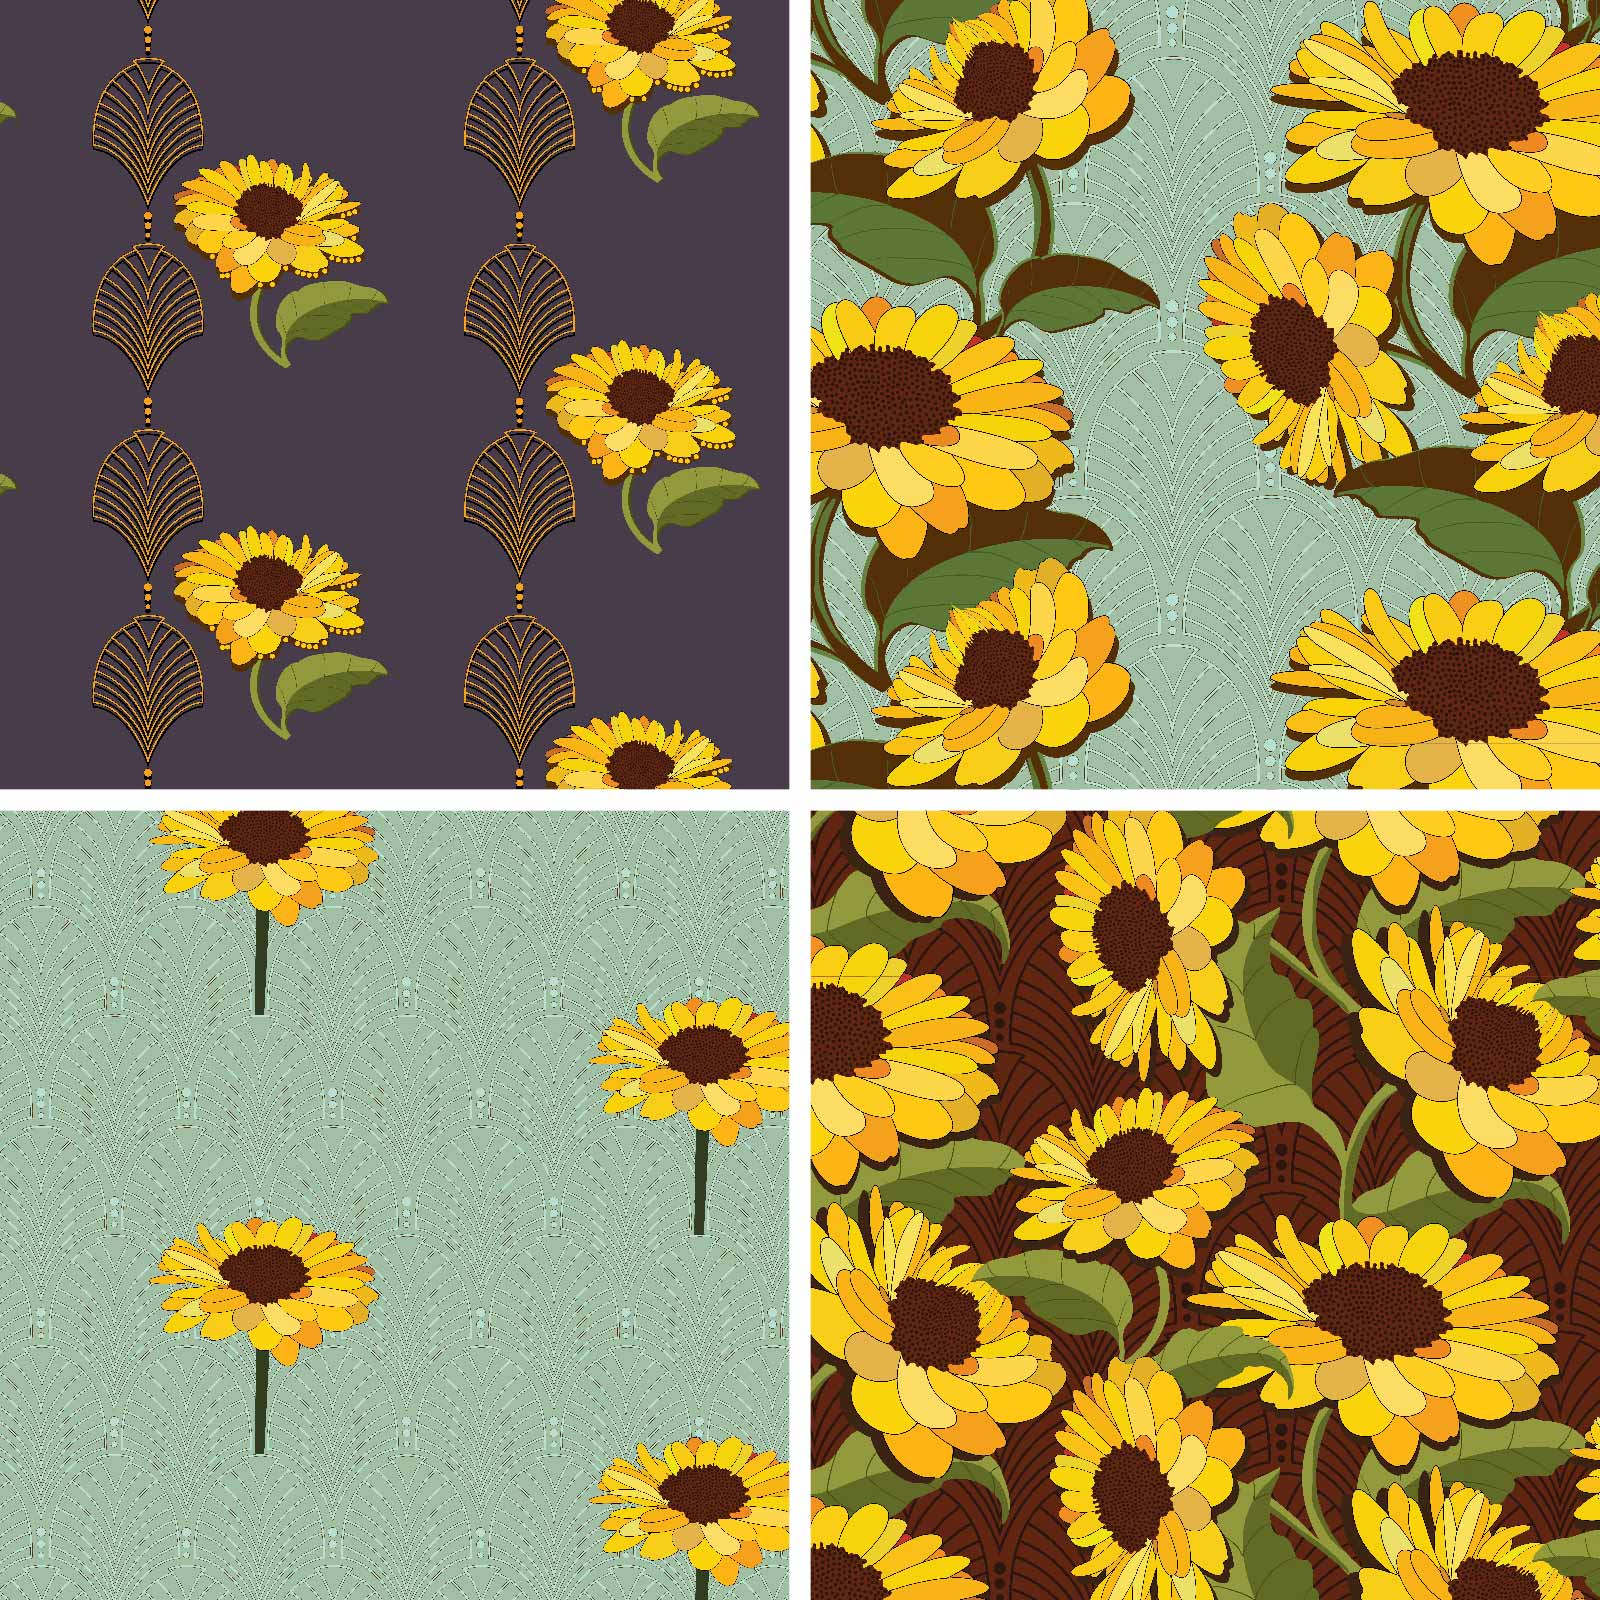 Sunflowers Seamless Pattern Designs cover image.